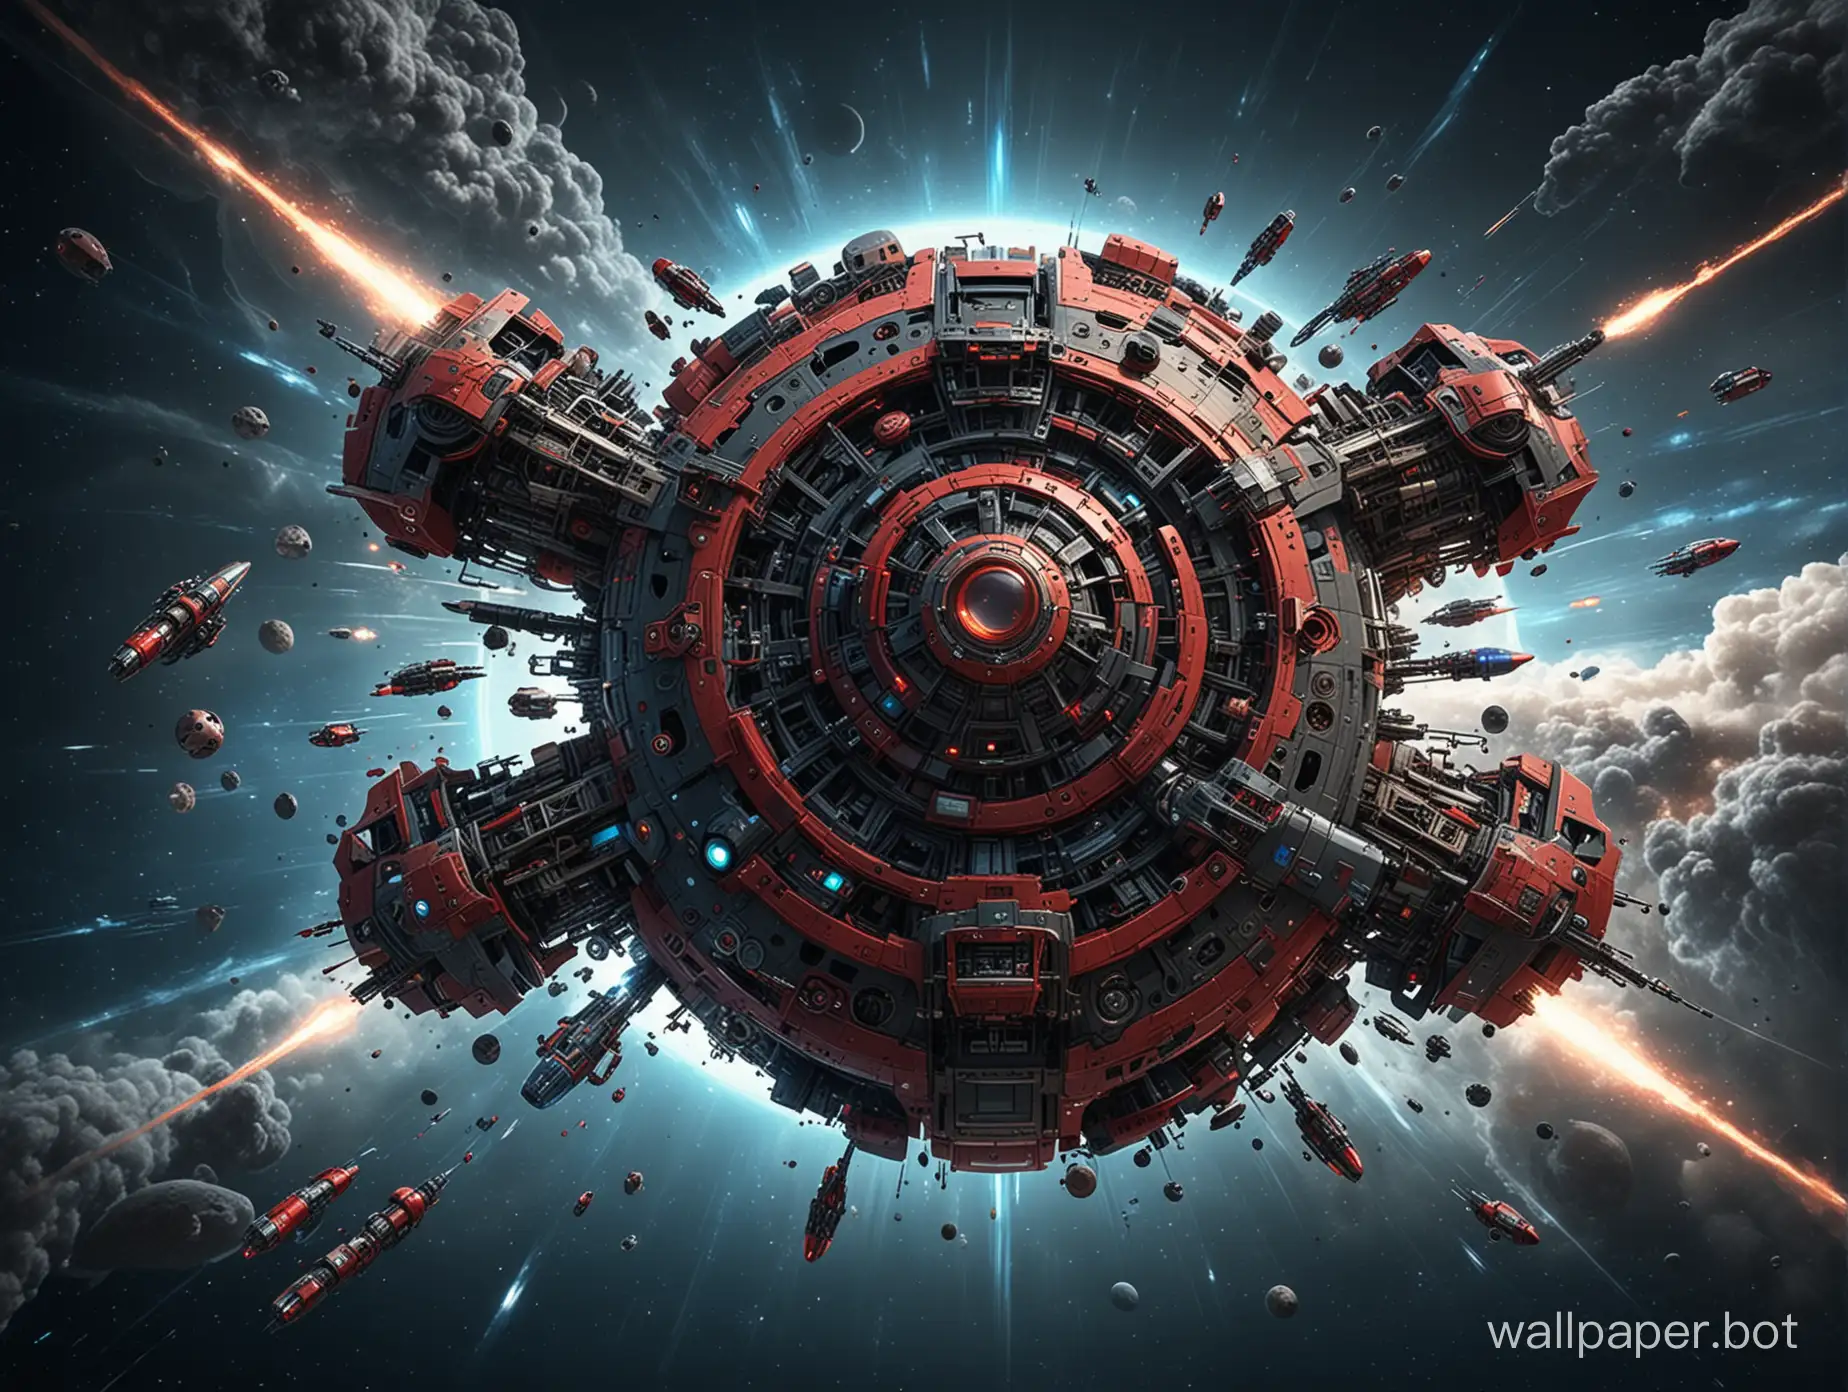 A multitude of mechanical structures resembling planets collapsing into each other in outer space. Visible black hole. Light Vectors bending. Hexagonal Design. Shades of red, blue and grey. Assymetrical. Battlecruisers and small ships of steampunk design. Style of Verhoven`s Robocop.